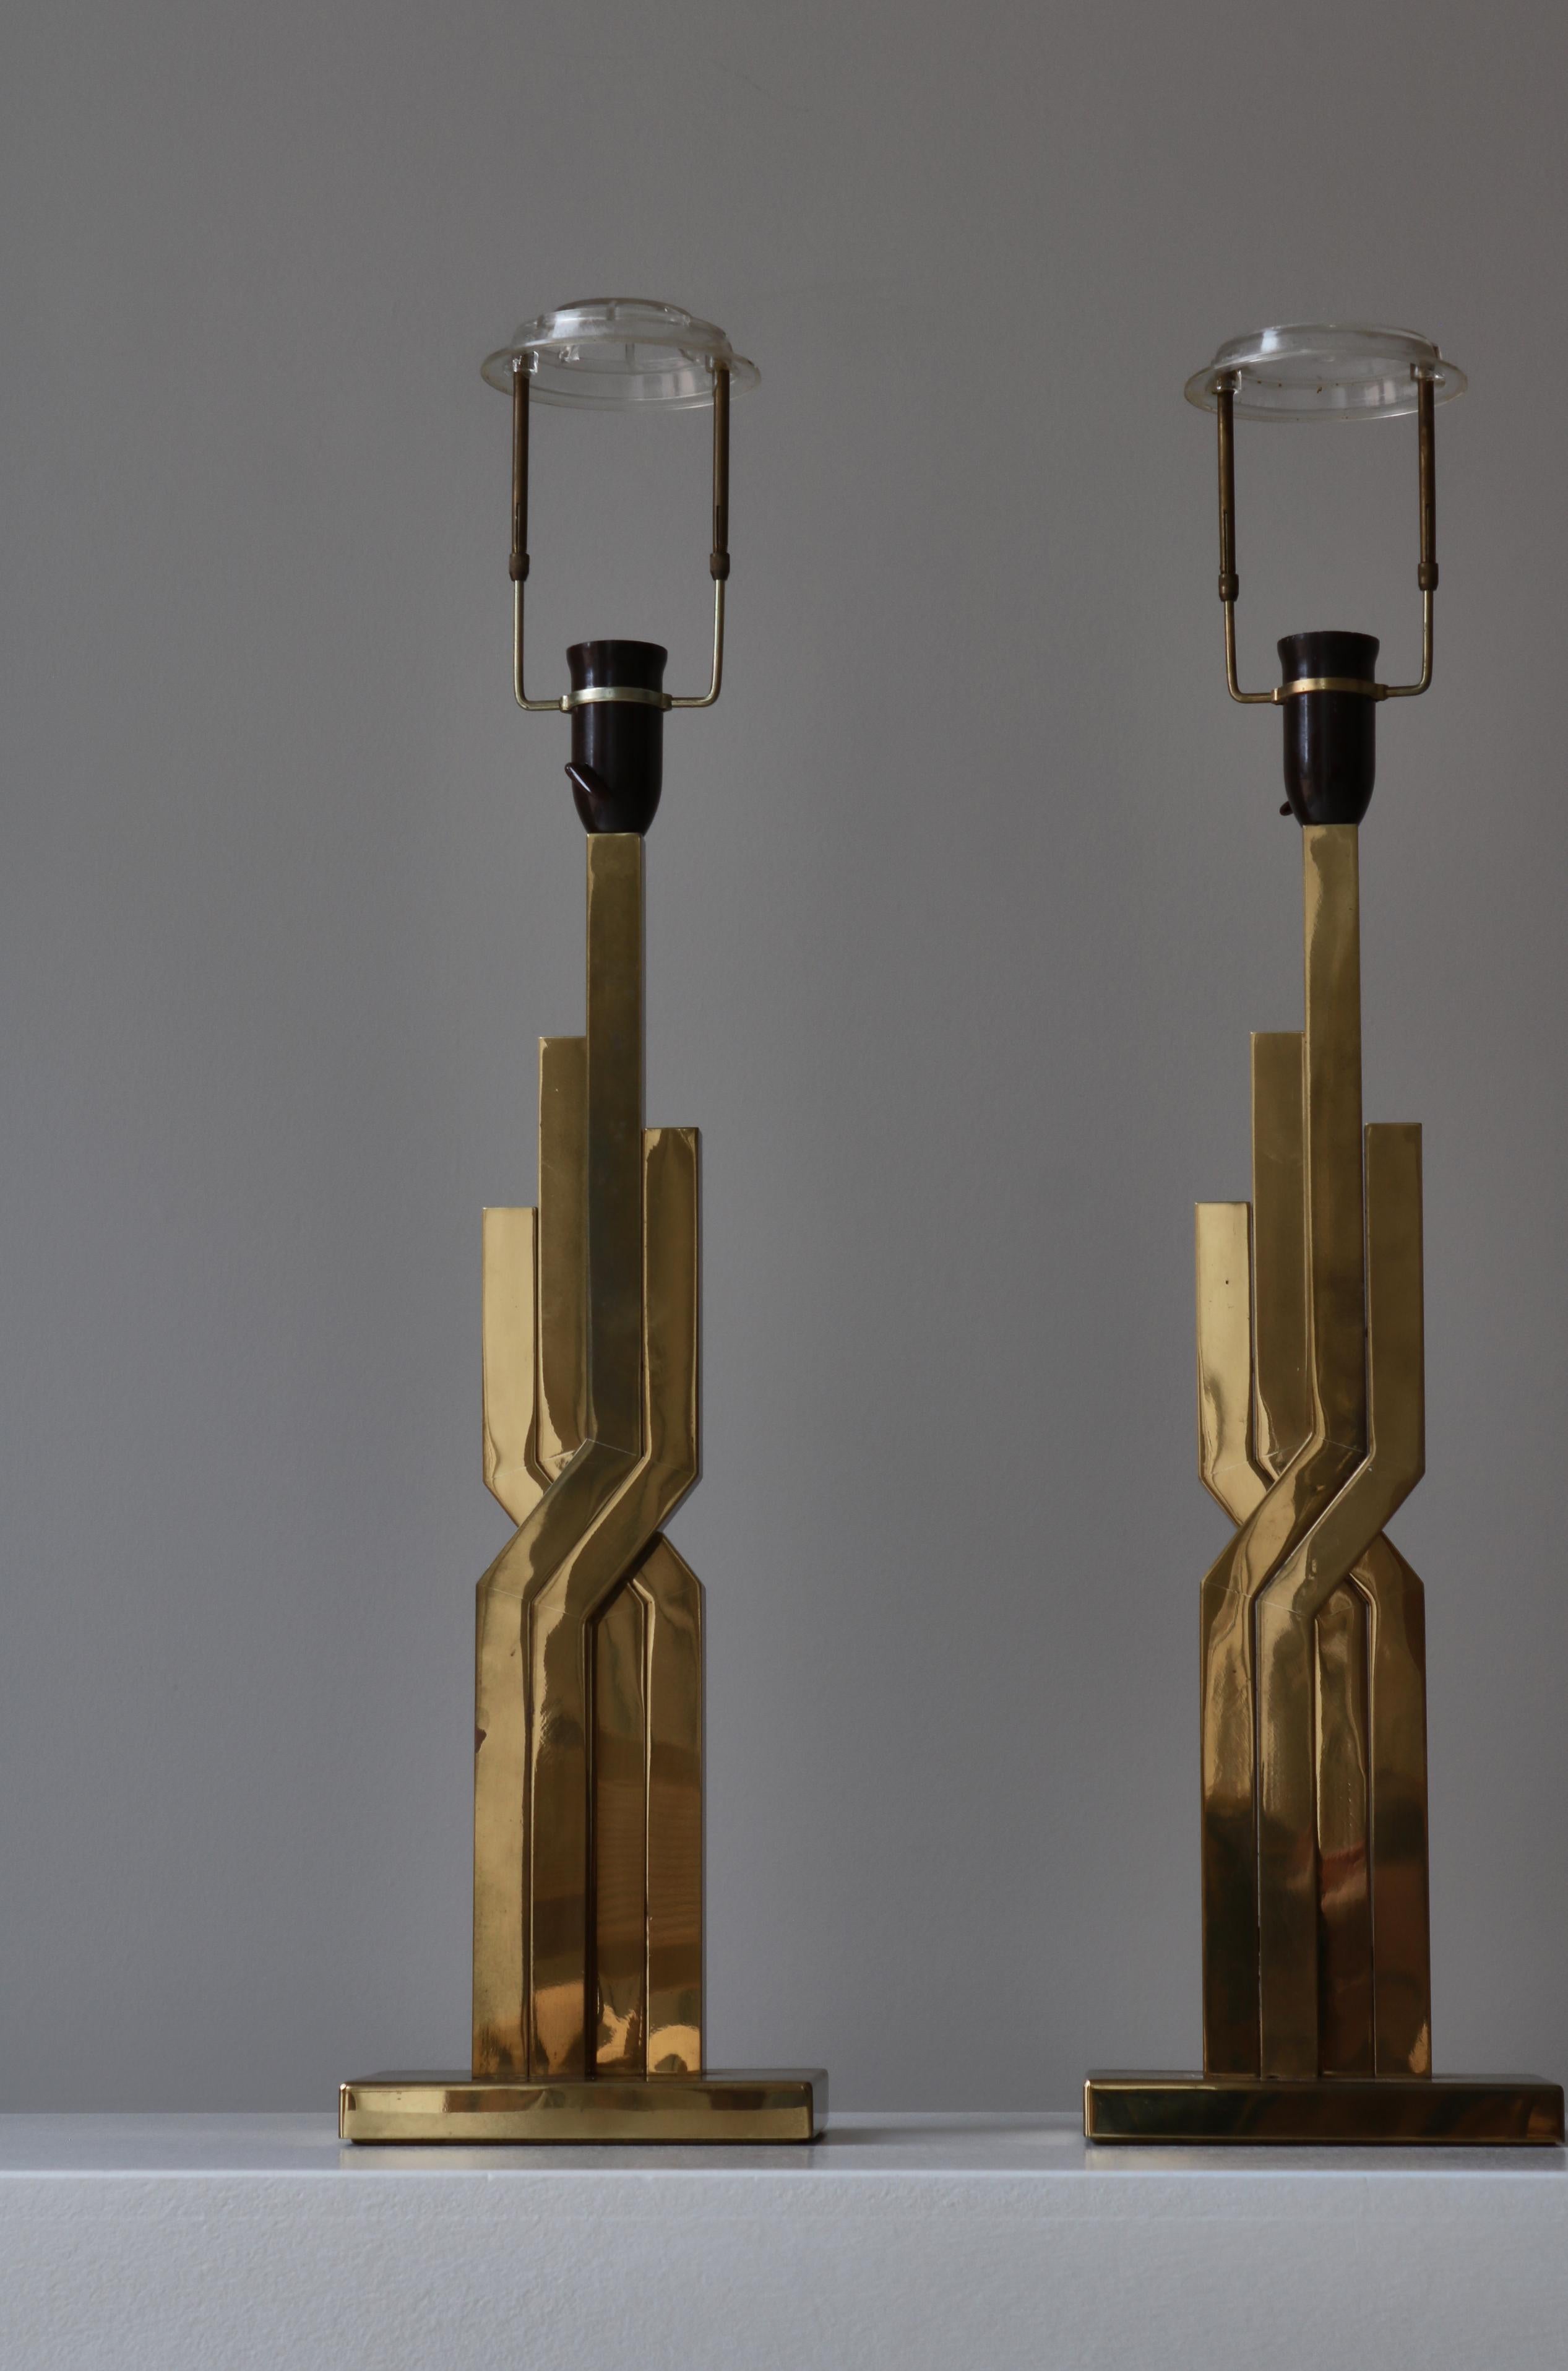 Large Danish Modern Table Lamps in Brass by Svend Aage Holm-Sørensen, 1960s For Sale 11